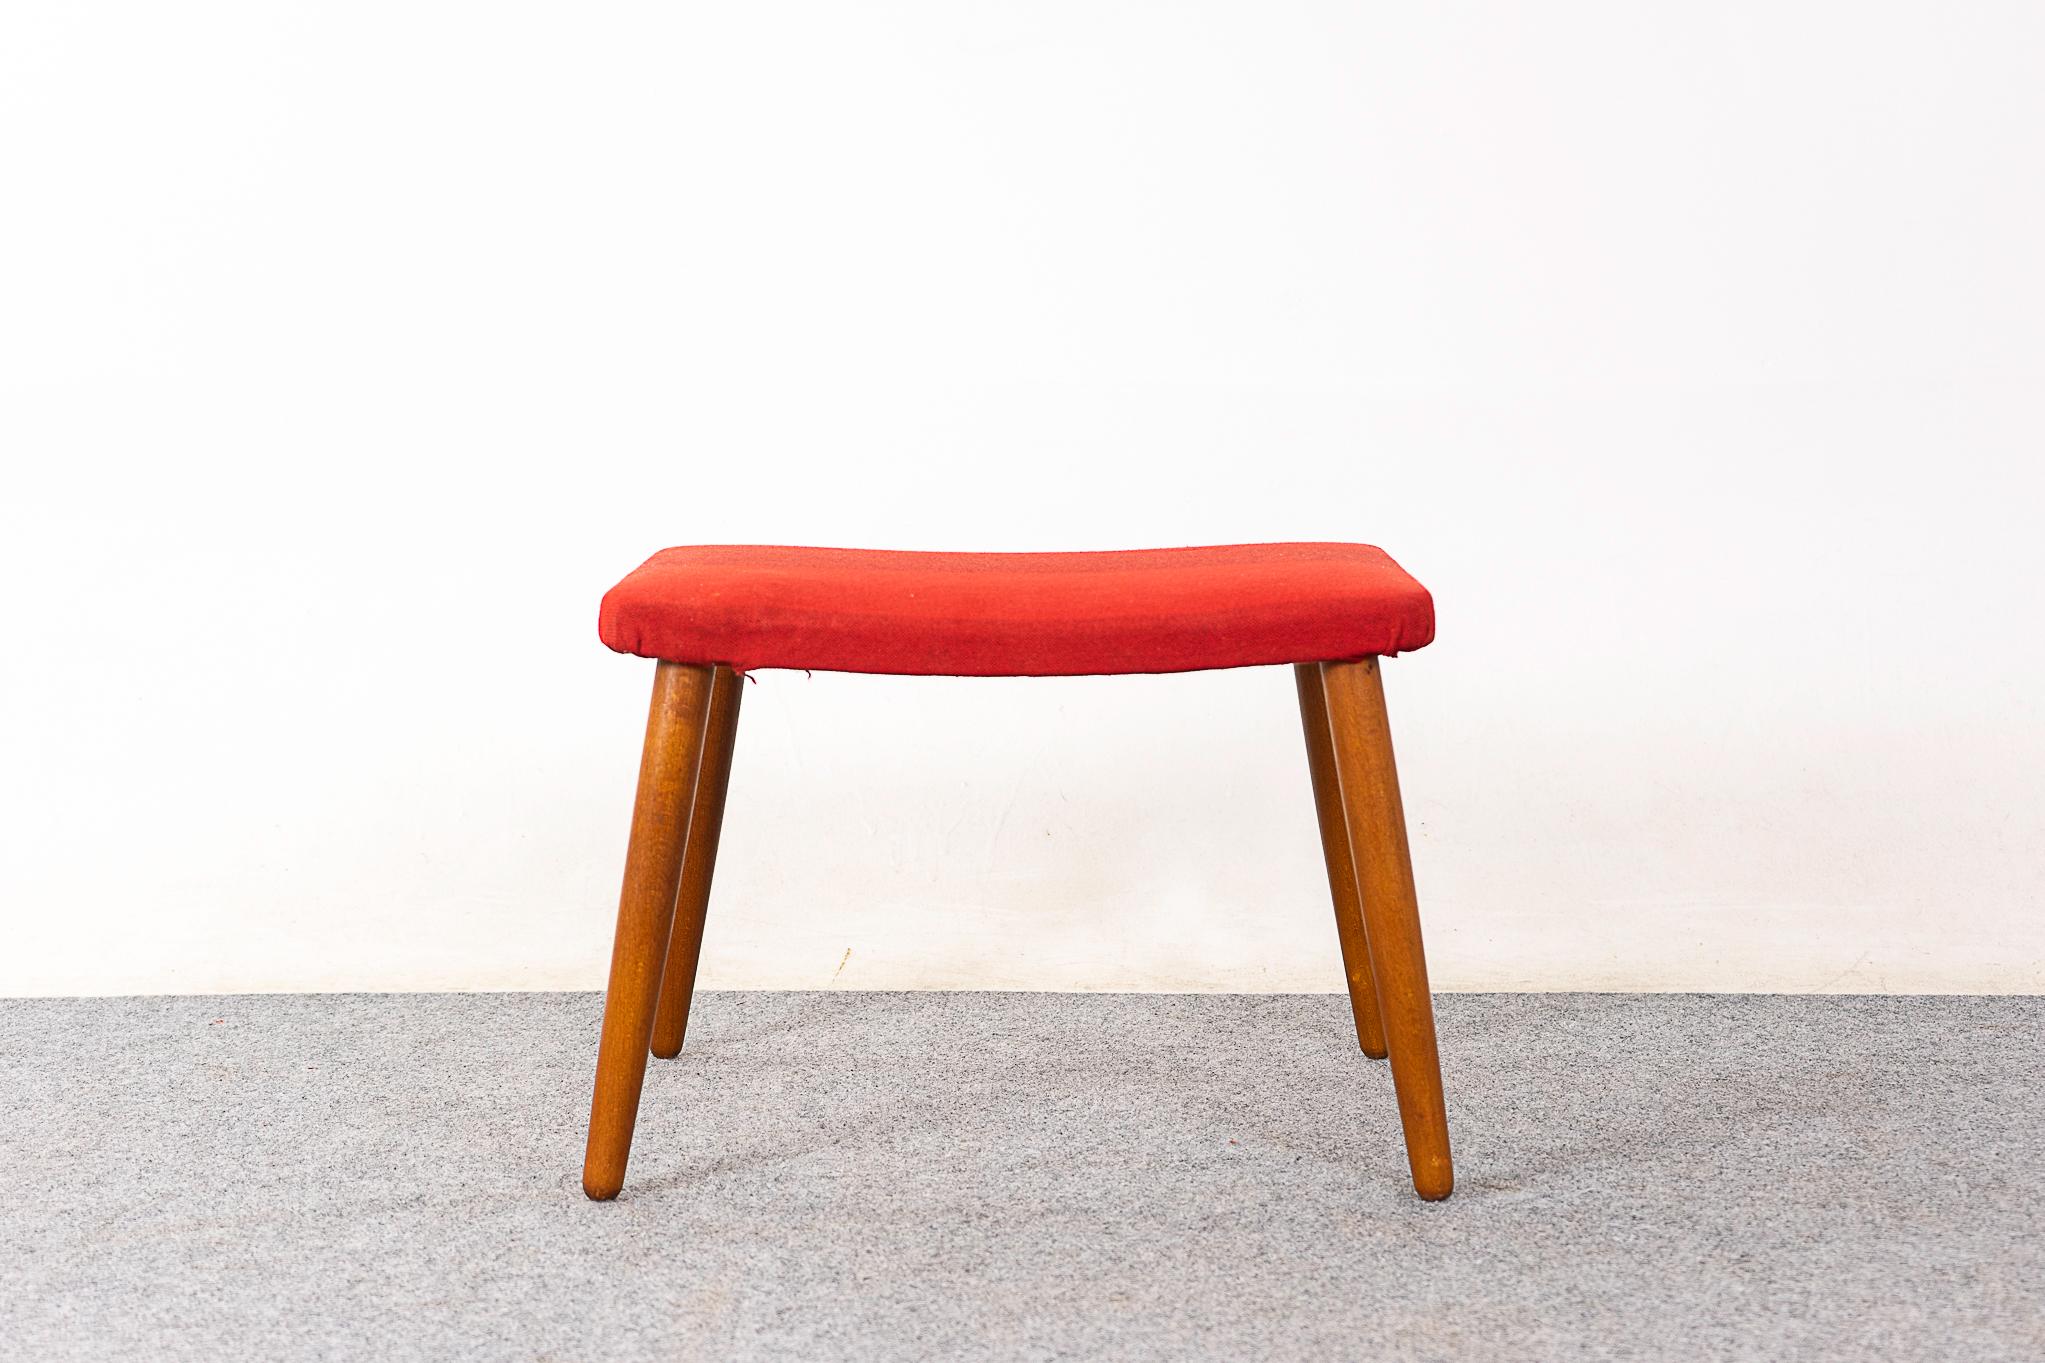 Beech Danish footstool, circa 1960's. Spayed removable legs and original upholstery with minor wear and tear. 
